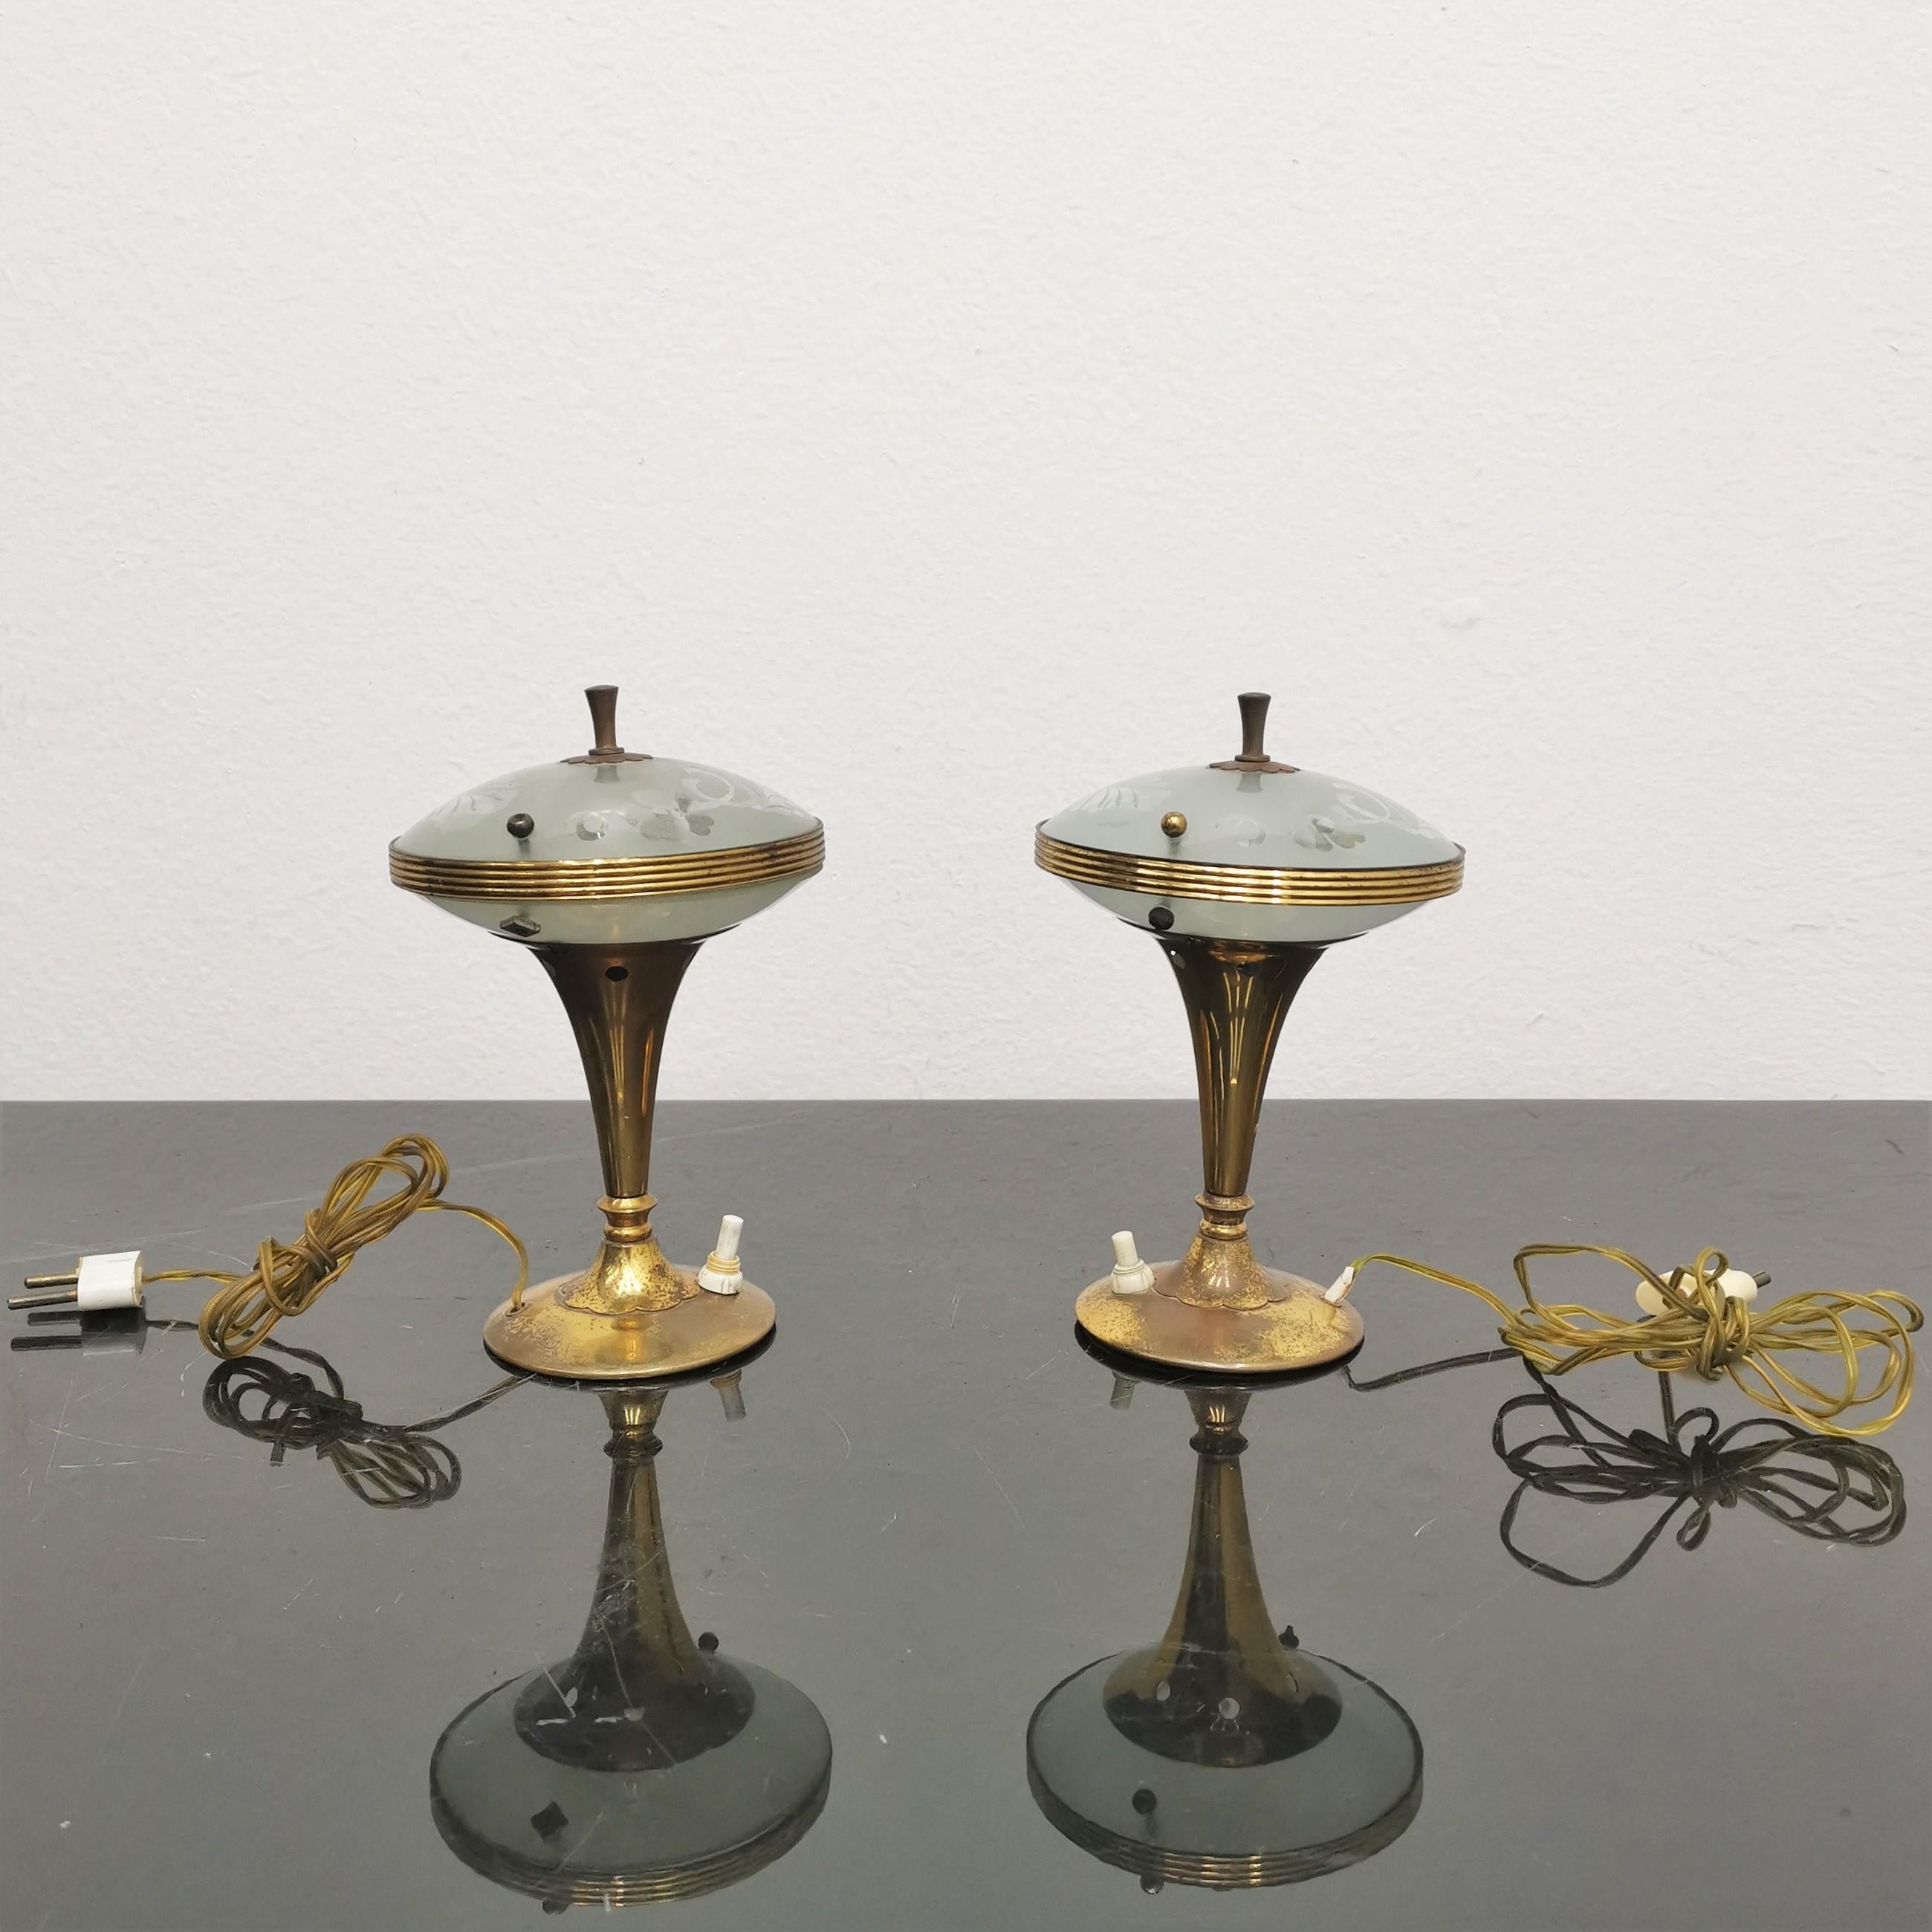 Pair of delicious abat-jour in gilded brass with satin glass diffusers with floral motifs. On/off button on the base. Attributed to Pietro Chiesa, 1950s, Italy.
Wear consistent with age and use.